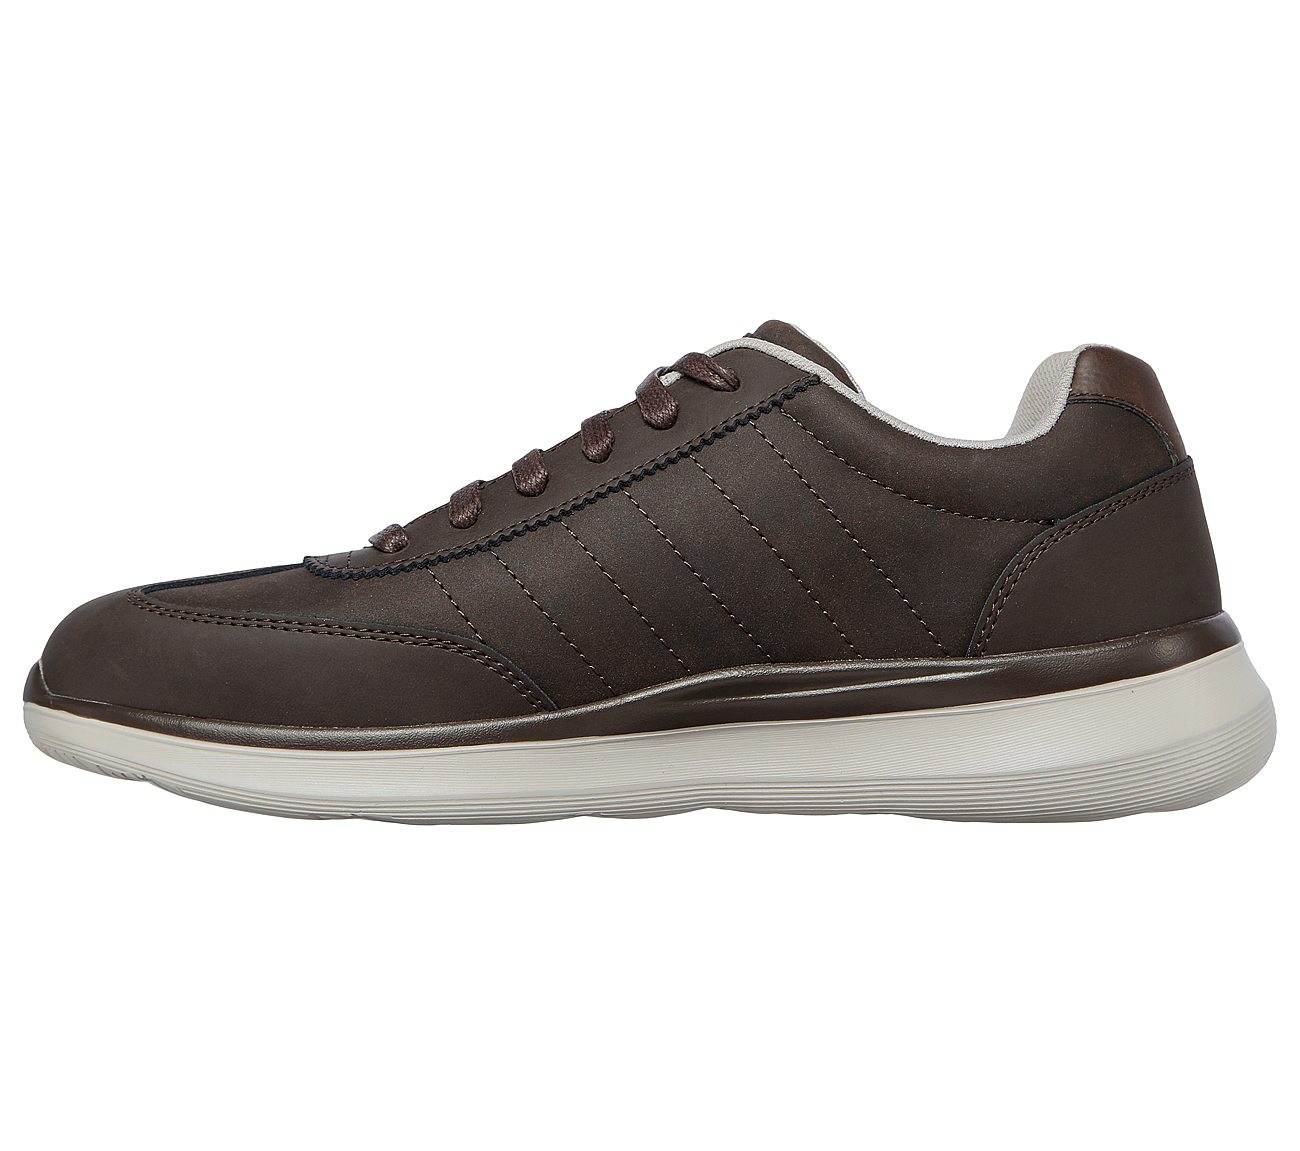 DELSON 2.0 - YORKSON, CCHOCOLATE Footwear Left View